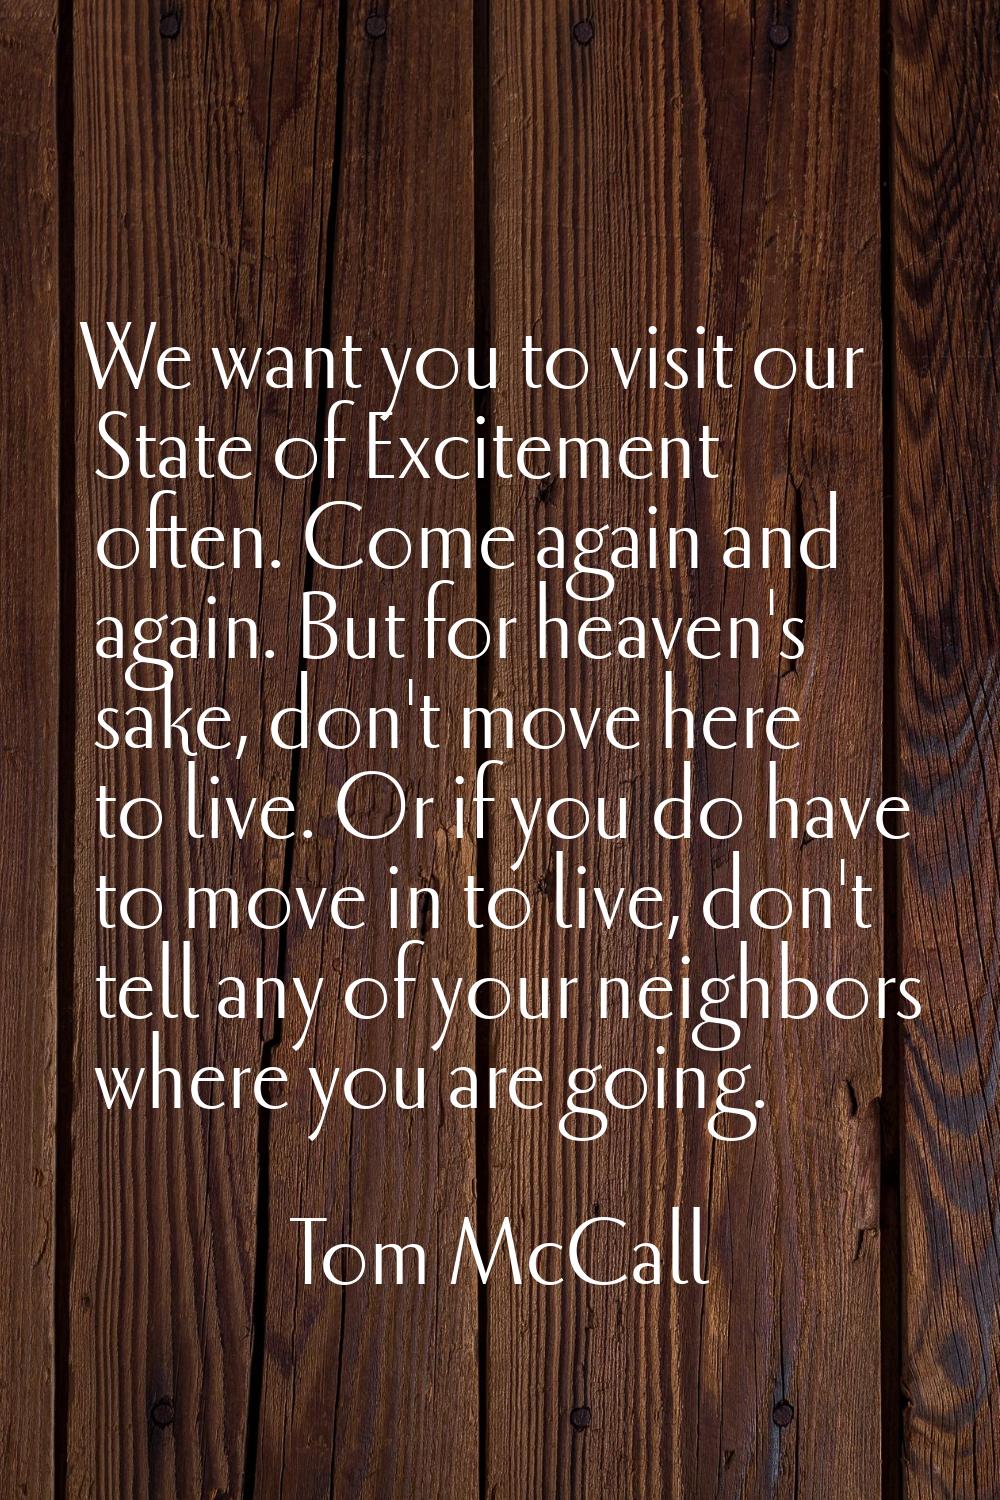 We want you to visit our State of Excitement often. Come again and again. But for heaven's sake, do